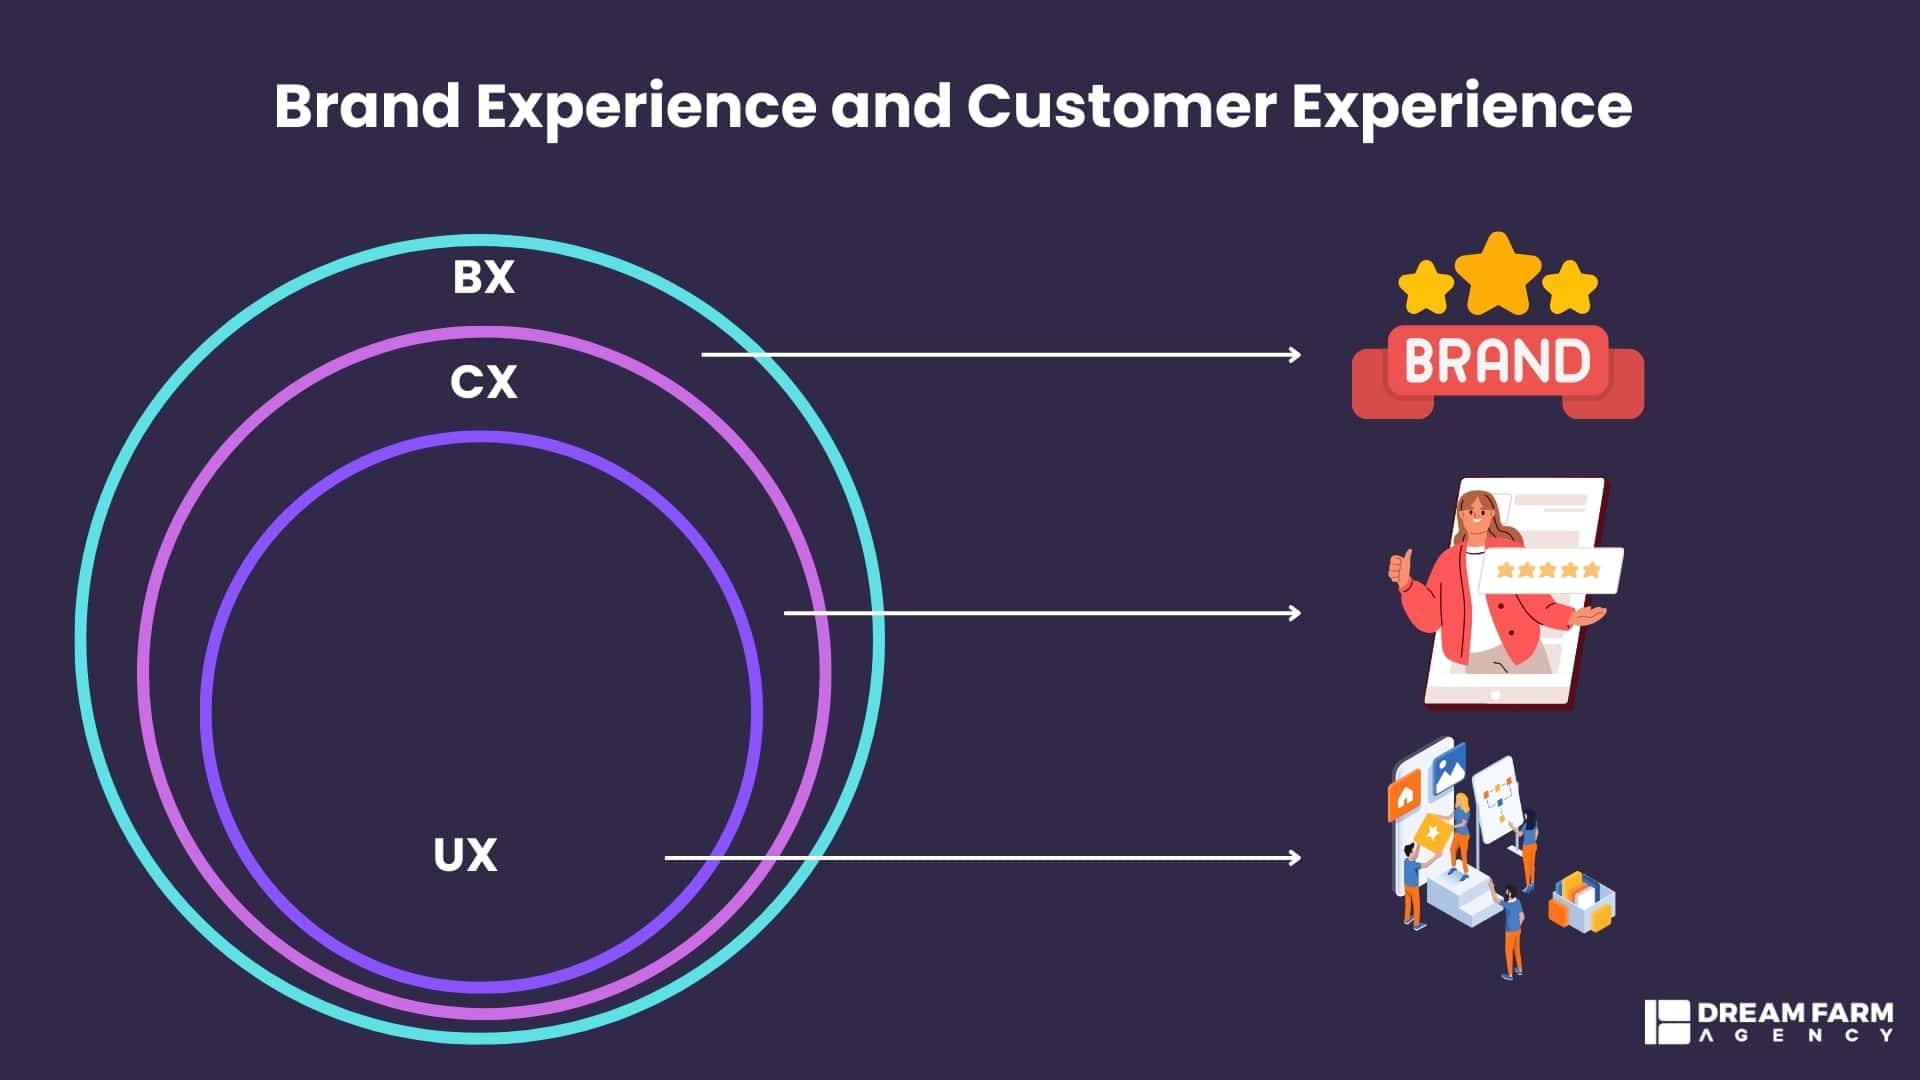 The difference between brand experience and customer experience